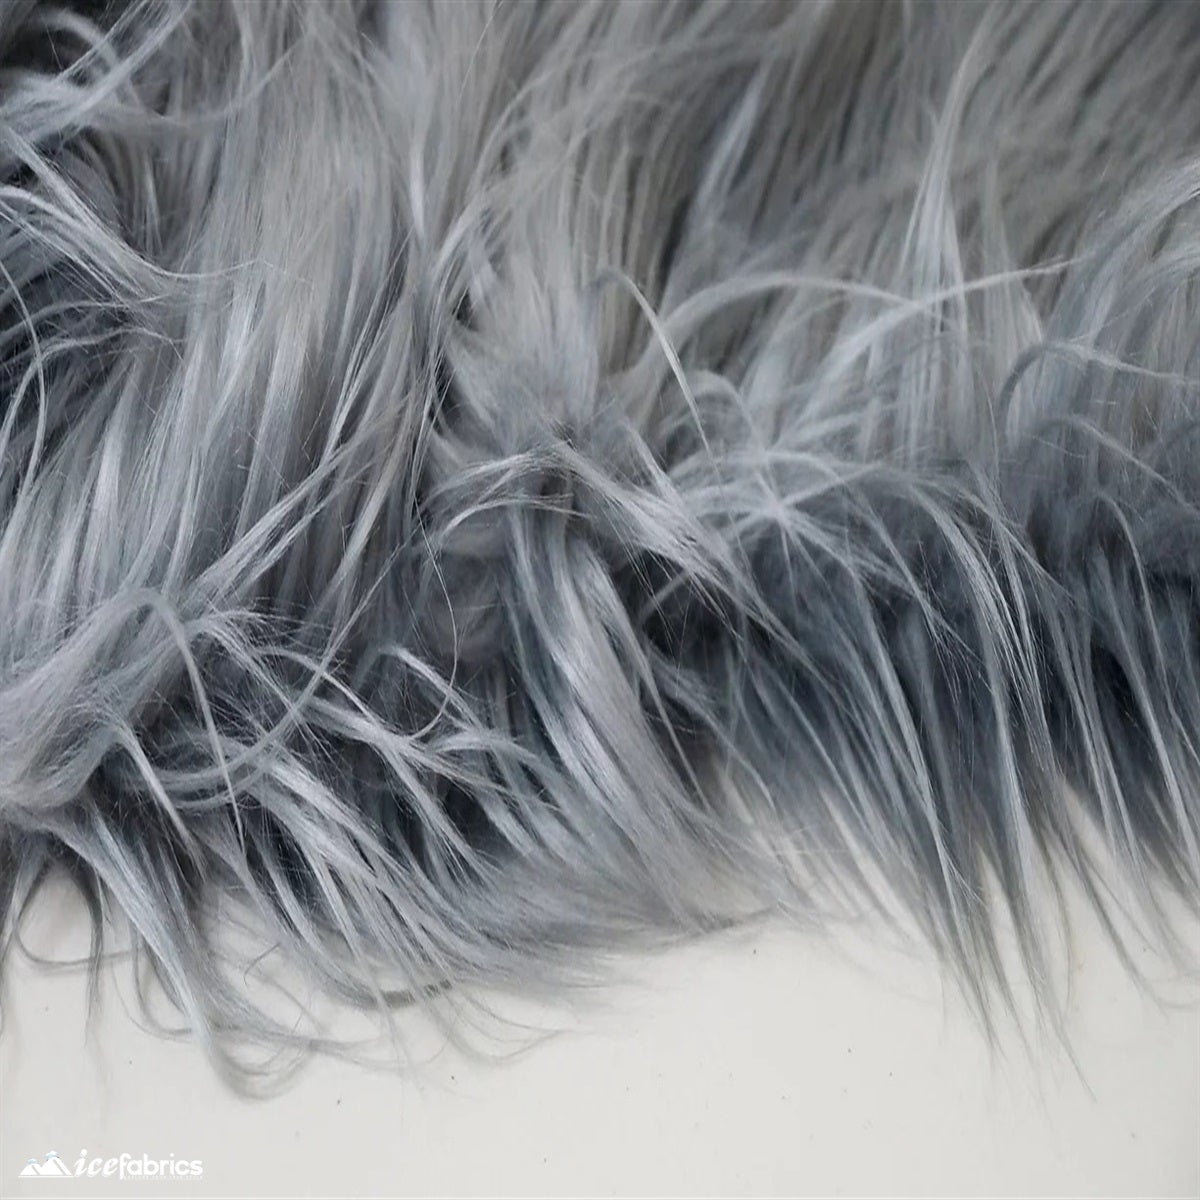 Mohair Faux Fur Fabric By The Roll (20 Yards) 4 Inch PileICE FABRICSICE FABRICSCharcoalBy The Roll (60" Wide)Mohair Faux Fur Fabric By The Roll (20 Yards) 4 Inch Pile ICE FABRICS